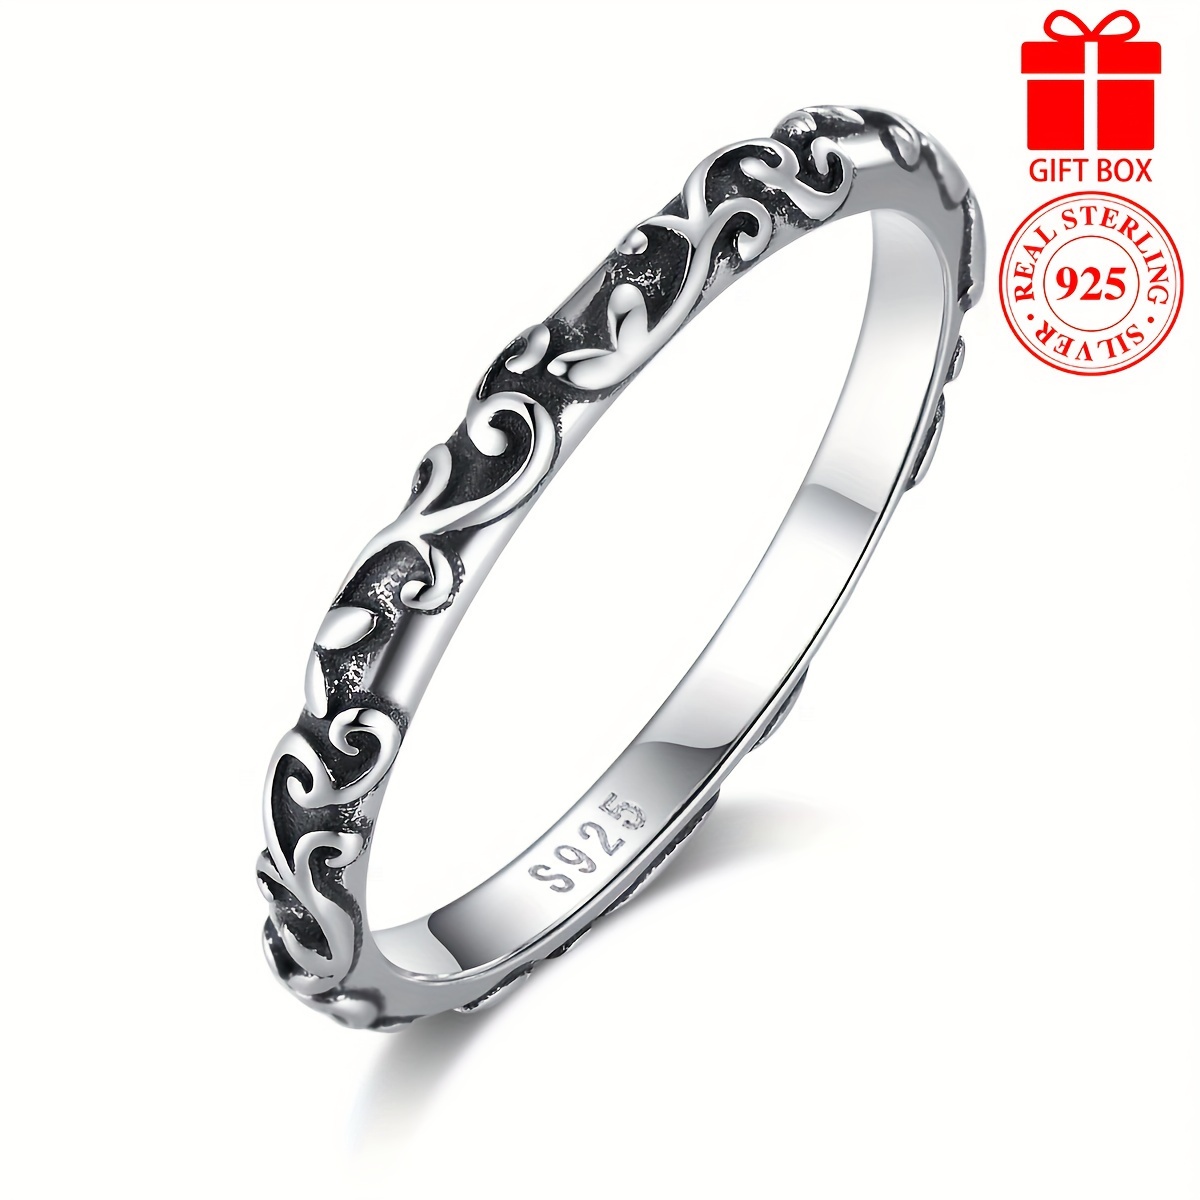 

1pc 925 Sterling Silver Ring Carved Vine On The Surface Match Daily Outfits Vintage Style Jewelry For Female Symbol Of Elegance And Vitality